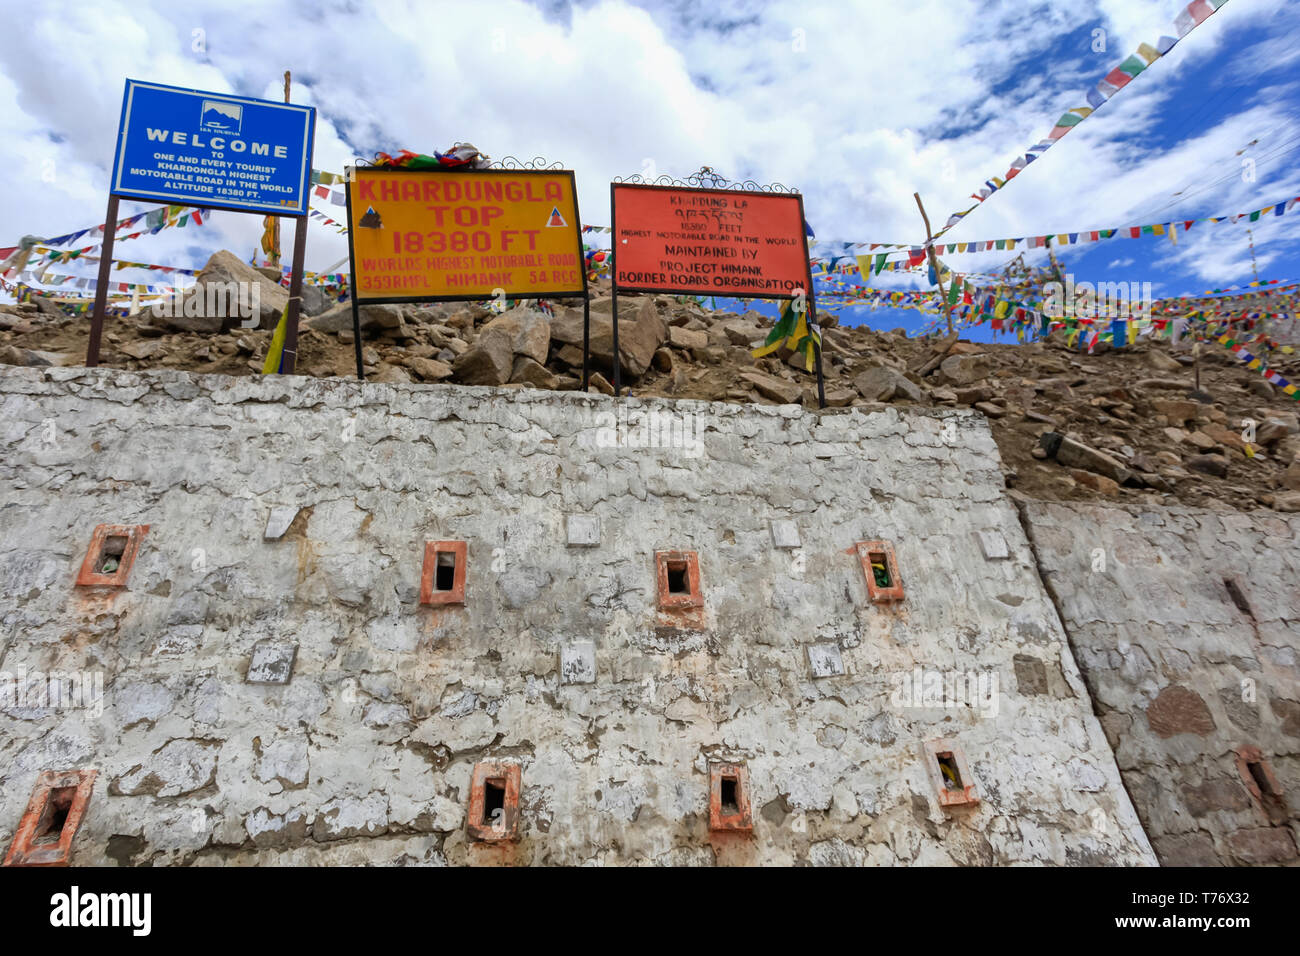 Welocme signs at the border wall  between Jammu and Kashmir on the highest motorable road in the world 18,380 feet high. Stock Photo